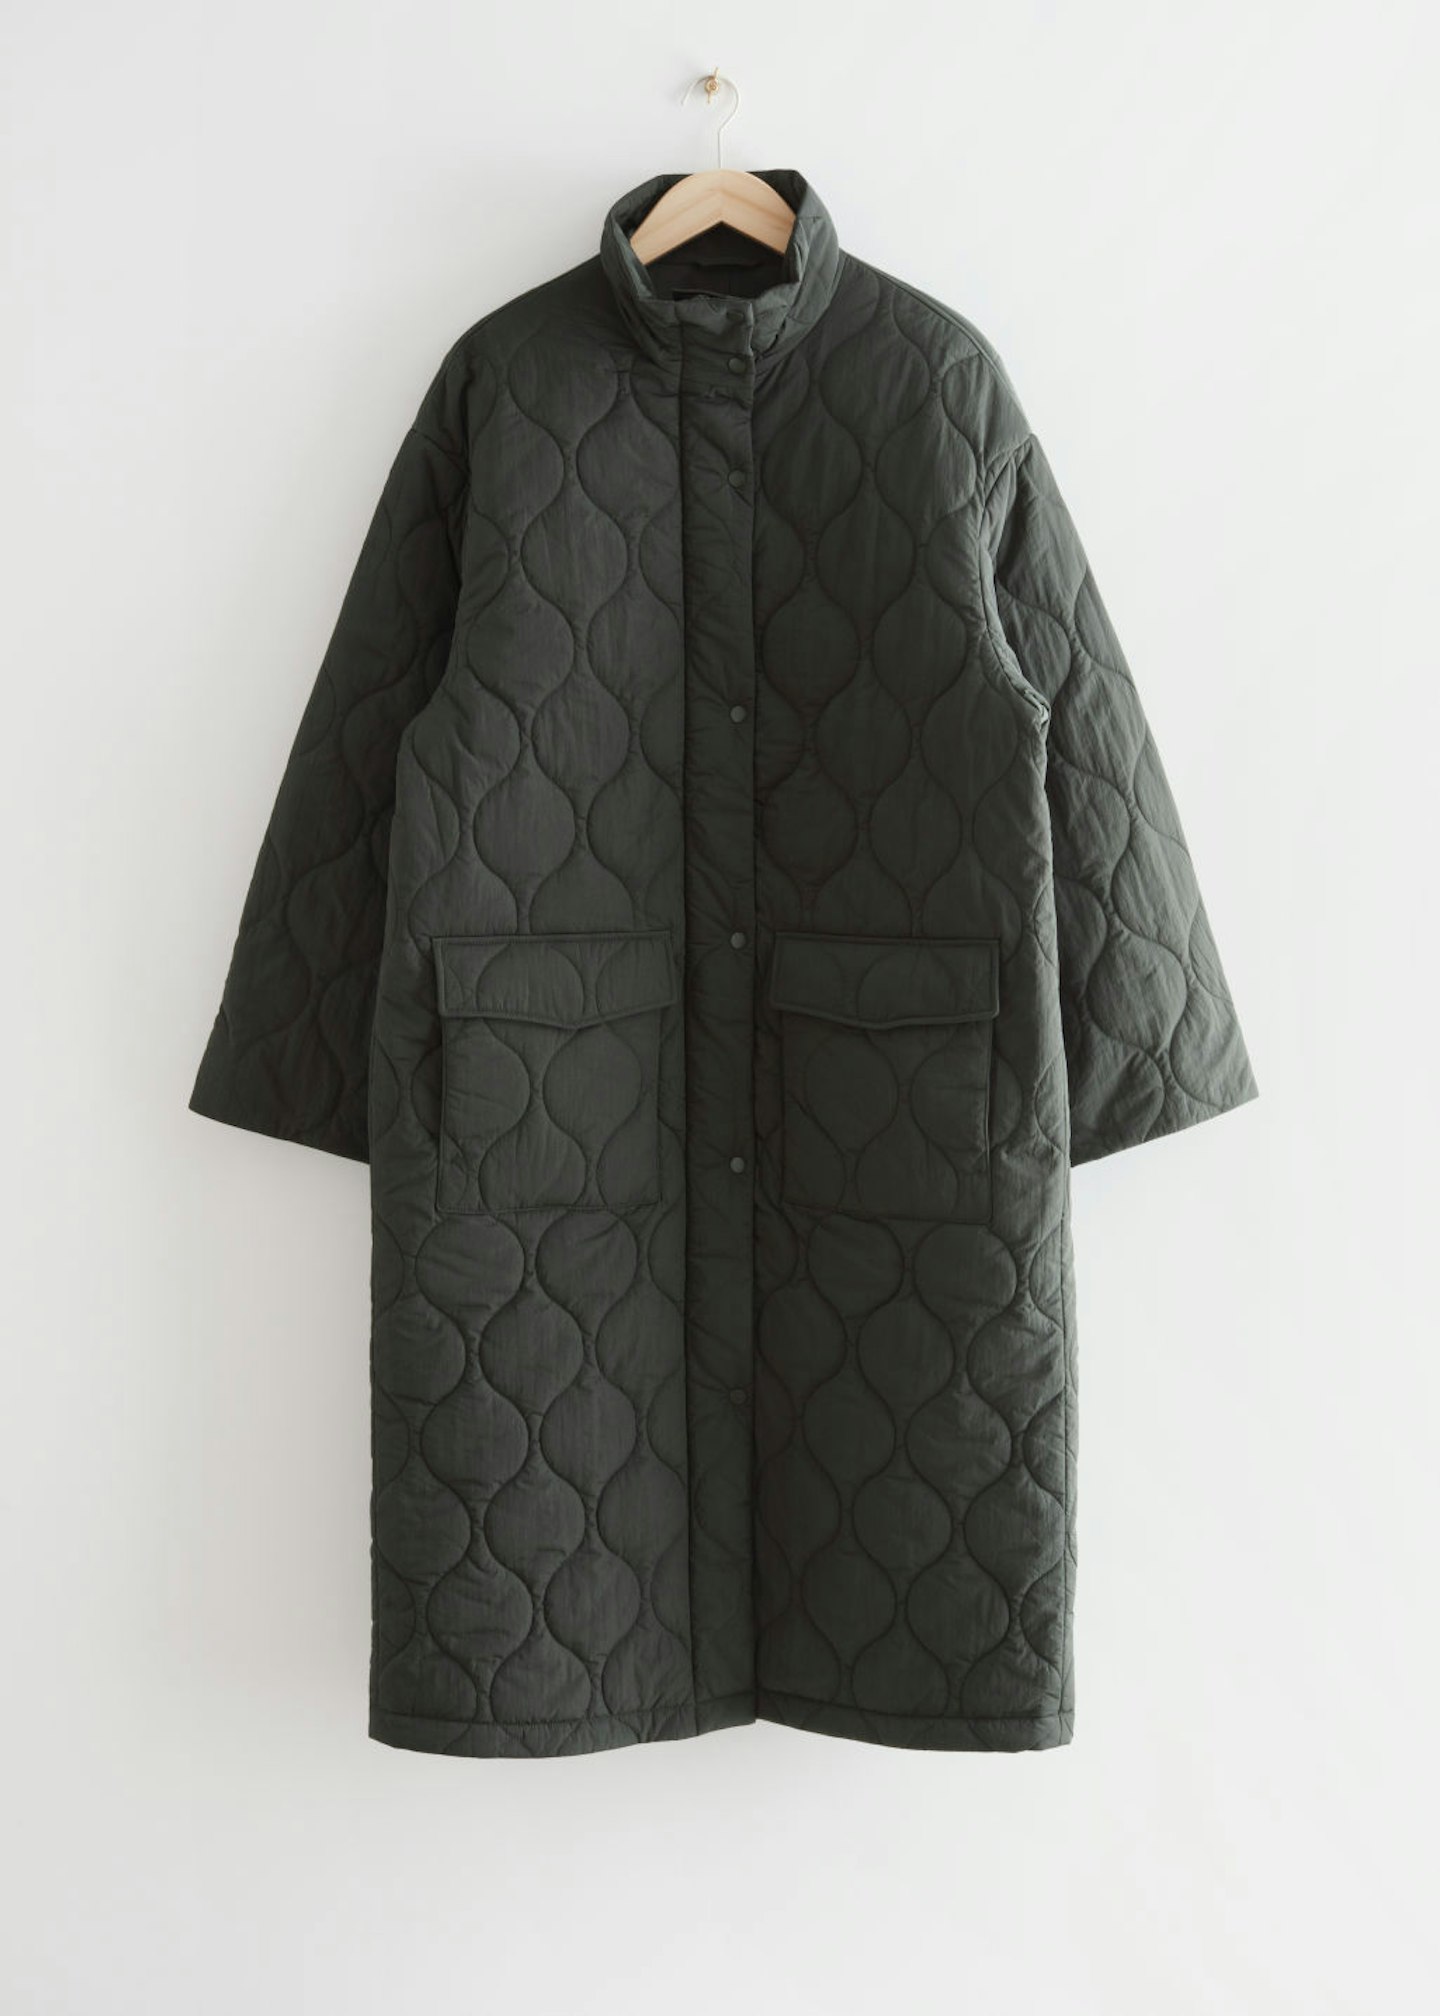 & Other Stories, Quilted Coat, £135